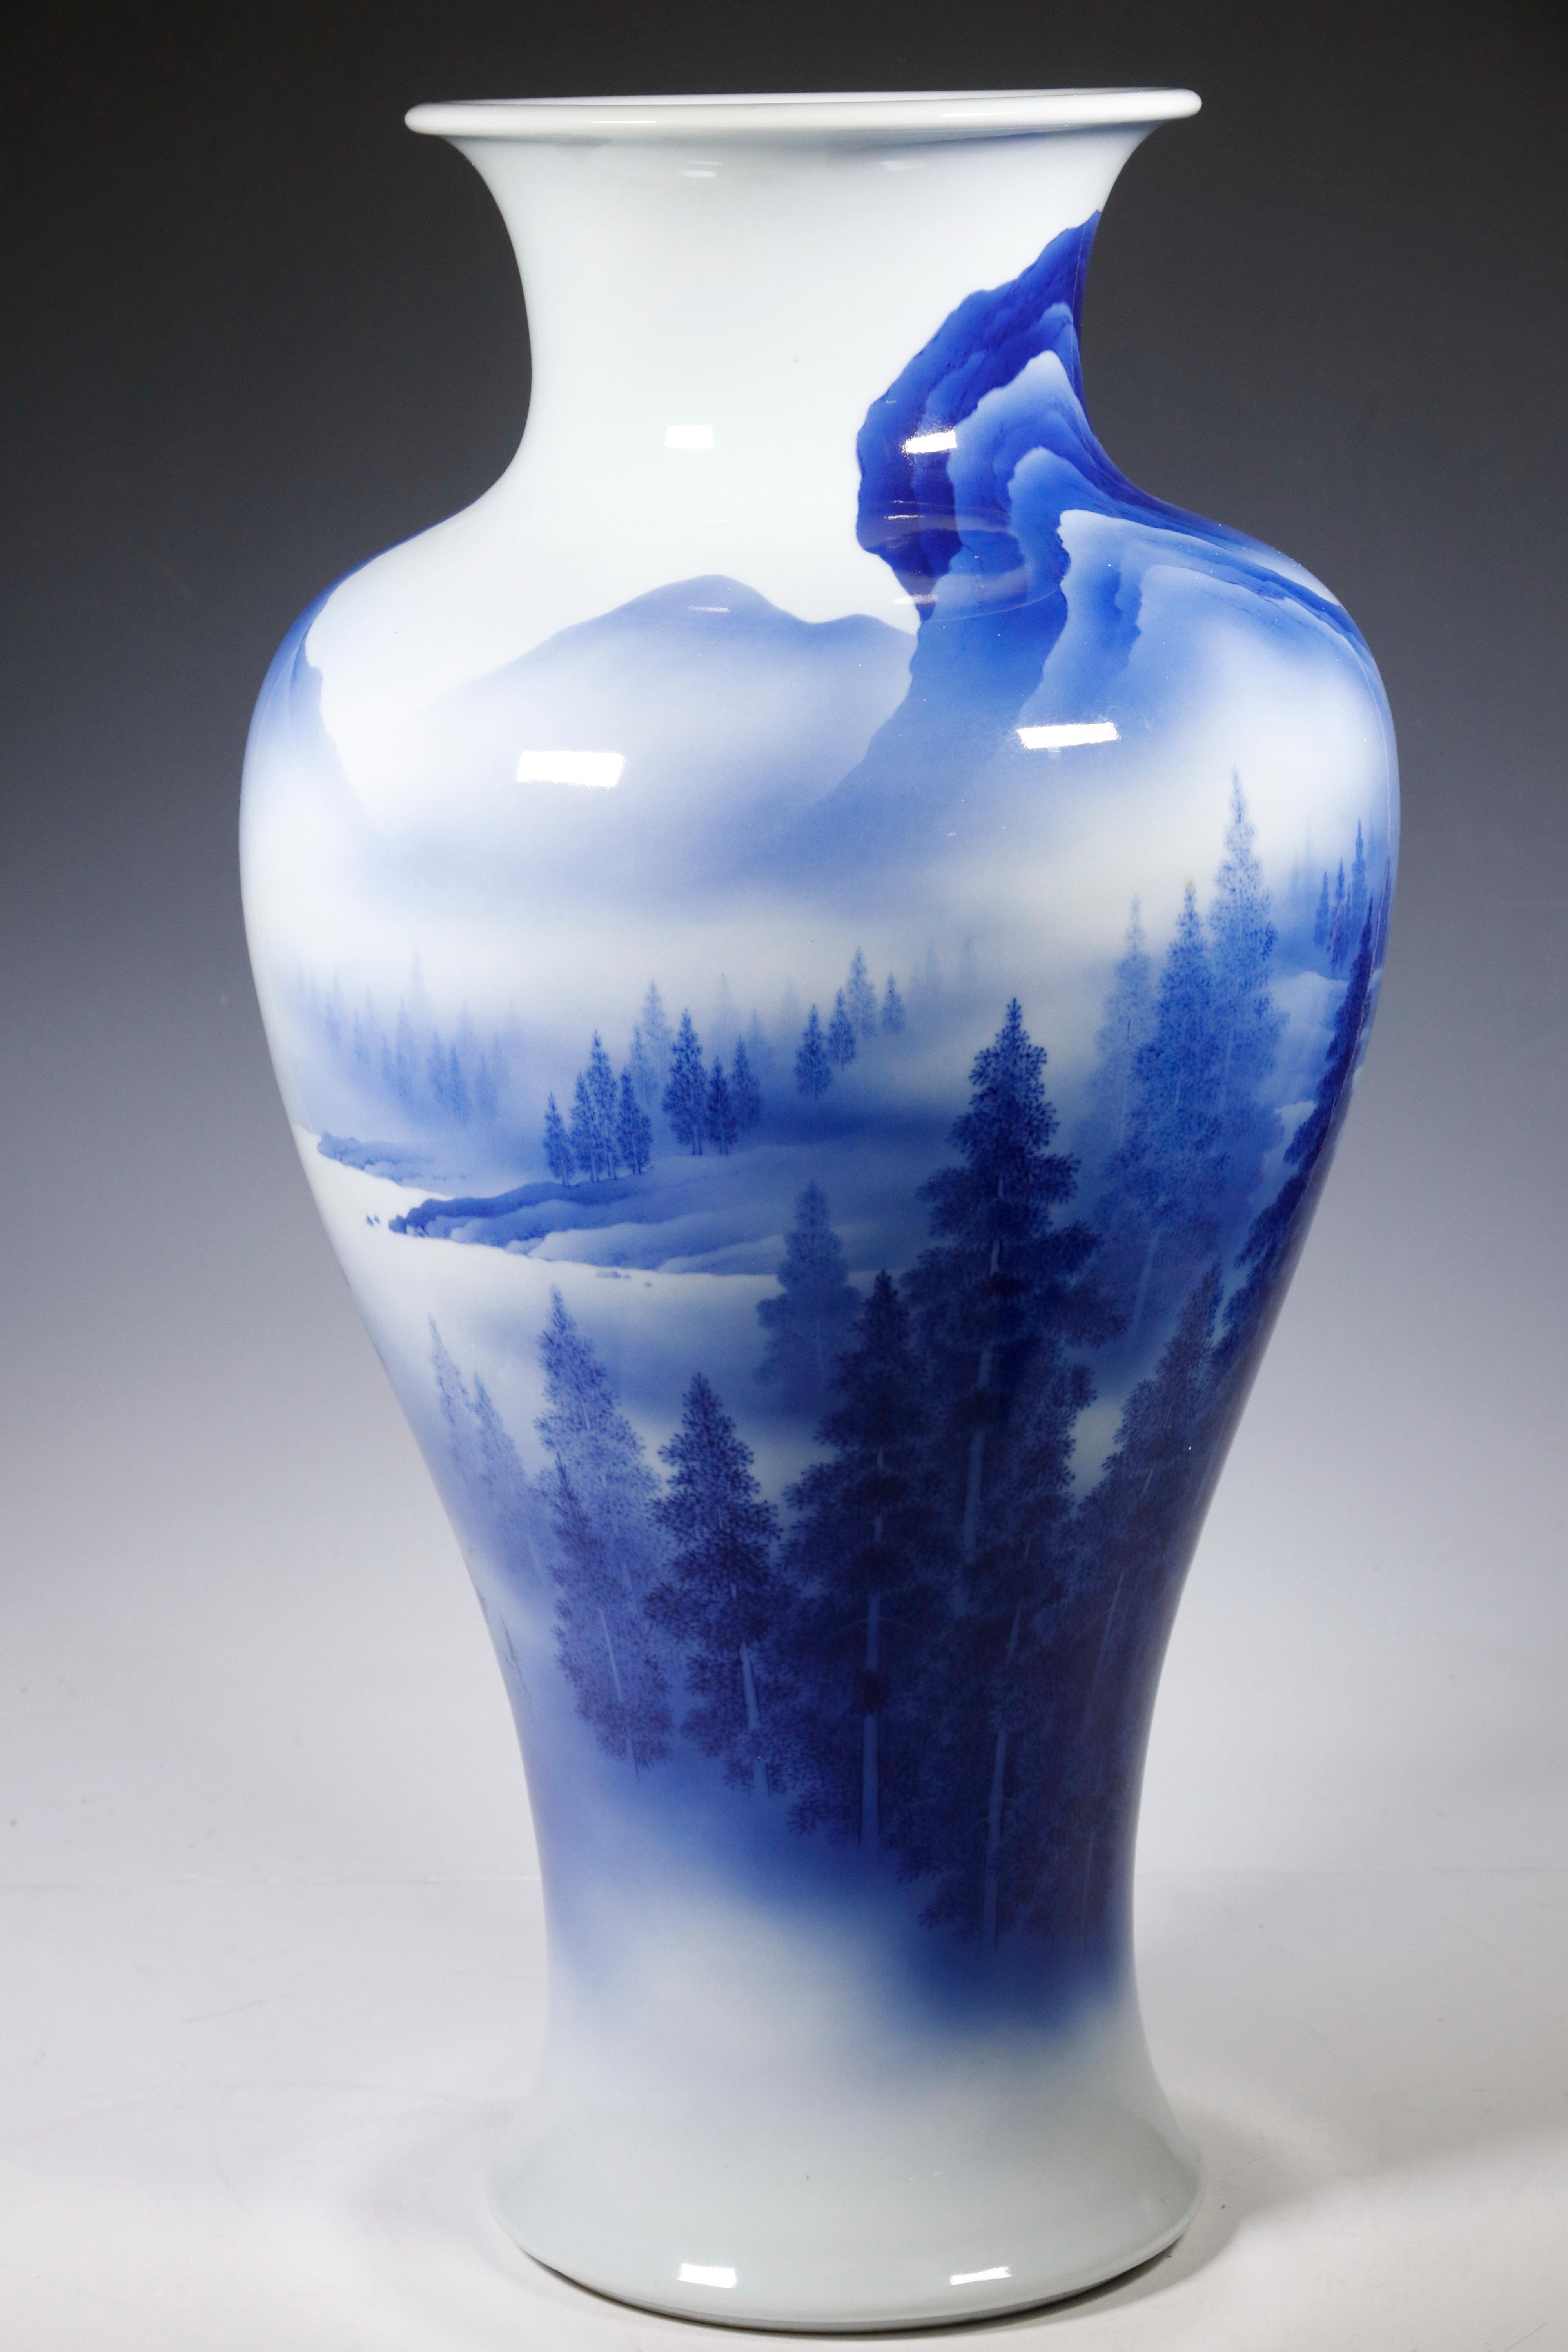 A striking blue and white vase from the studio of Japanese Potter Makuzu Kozan, also known as Miyagawa Kozan (1842–1916), one of the most established and collected ceramist from Meiji Period. Born as Miyagawa Toranosuke, Kozan established his